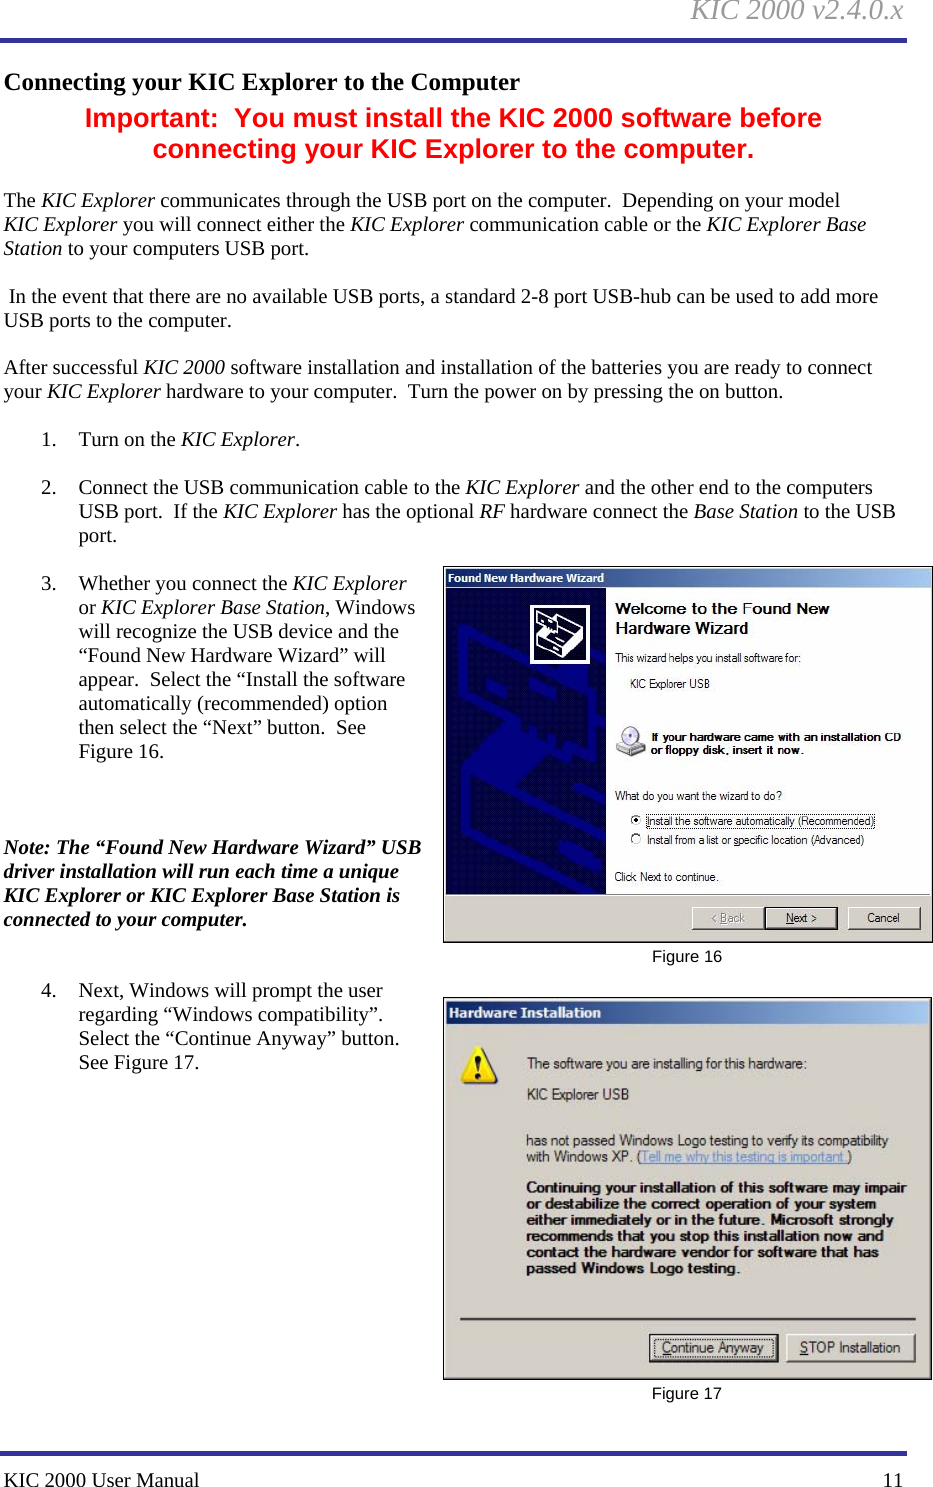 KIC 2000 v2.4.0.x KIC 2000 User Manual    11 Connecting your KIC Explorer to the Computer Important:  You must install the KIC 2000 software before connecting your KIC Explorer to the computer.  The KIC Explorer communicates through the USB port on the computer.  Depending on your model KIC Explorer you will connect either the KIC Explorer communication cable or the KIC Explorer Base Station to your computers USB port.    In the event that there are no available USB ports, a standard 2-8 port USB-hub can be used to add more USB ports to the computer.    After successful KIC 2000 software installation and installation of the batteries you are ready to connect your KIC Explorer hardware to your computer.  Turn the power on by pressing the on button.    1. Turn on the KIC Explorer.  2. Connect the USB communication cable to the KIC Explorer and the other end to the computers USB port.  If the KIC Explorer has the optional RF hardware connect the Base Station to the USB port.    3. Whether you connect the KIC Explorer or KIC Explorer Base Station, Windows will recognize the USB device and the “Found New Hardware Wizard” will appear.  Select the “Install the software automatically (recommended) option then select the “Next” button.  See Figure 16.      Note: The “Found New Hardware Wizard” USB driver installation will run each time a unique KIC Explorer or KIC Explorer Base Station is connected to your computer.     4. Next, Windows will prompt the user regarding “Windows compatibility”.  Select the “Continue Anyway” button.  See Figure 17.                Figure 16  Figure 17 